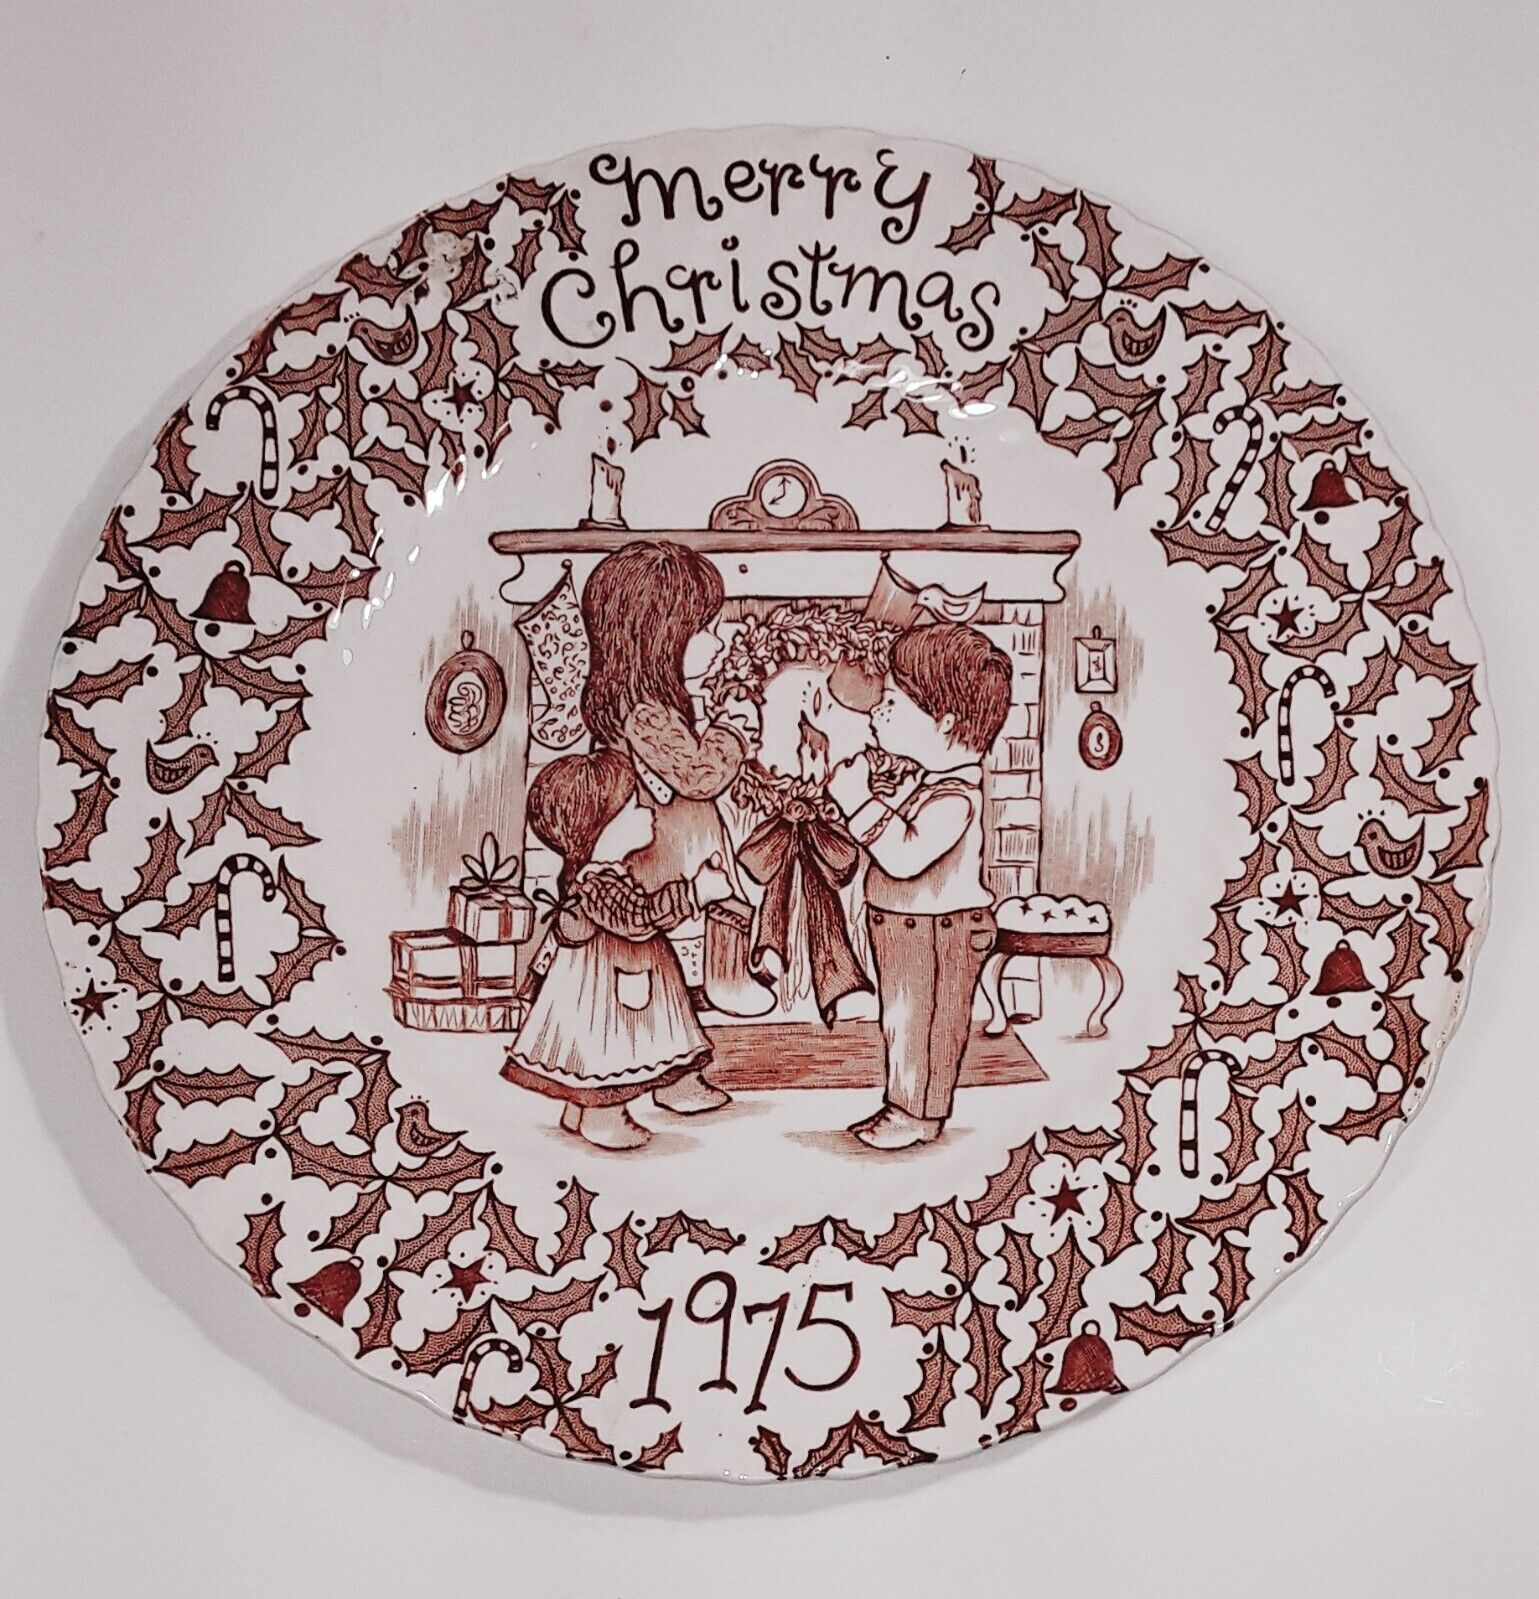 Vintage Crownford China by Norma Sherman 1975 Merry Christmas Plate England